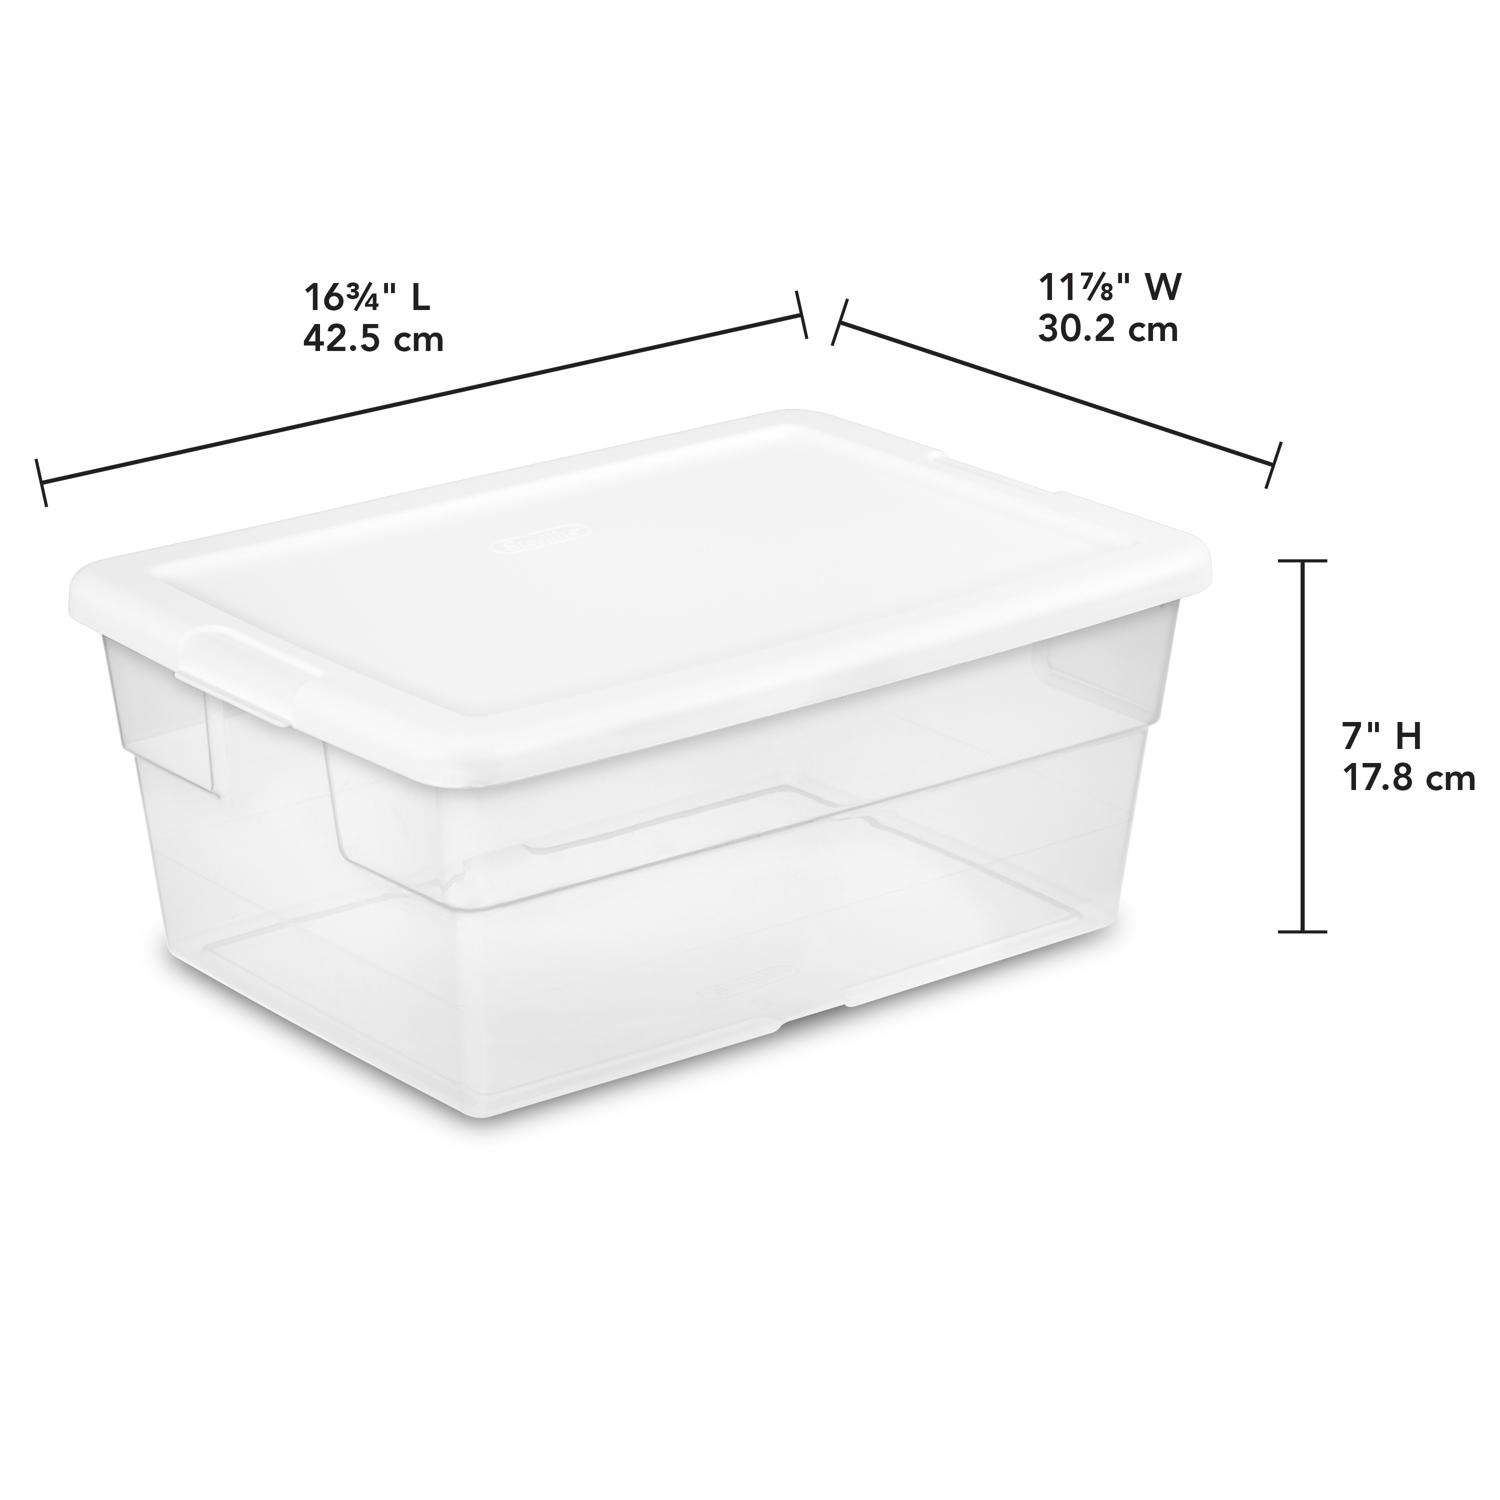 Ace 15 in. W X 19 in. H Storage Organizer Plastic 60 compartments Gray -  Ace Hardware